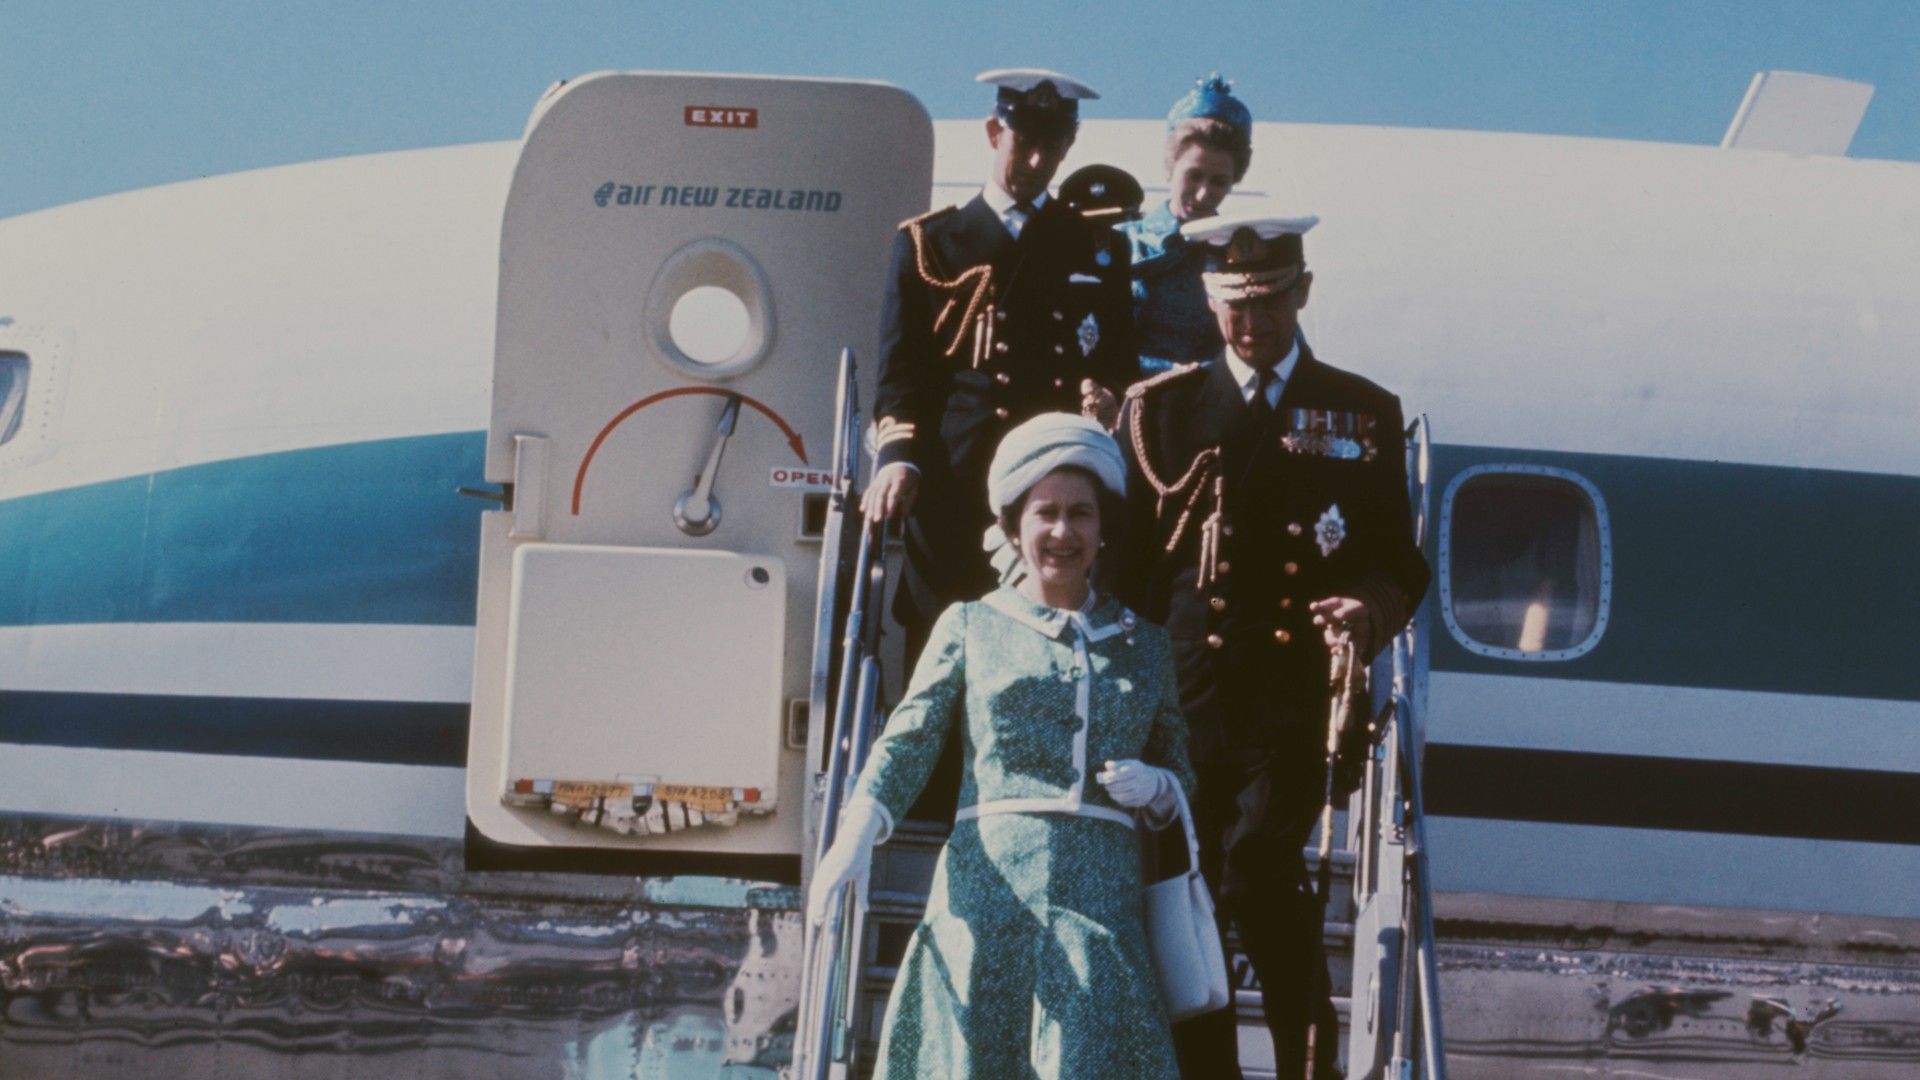 <p>                     In 1970, the Queen, Prince Philip, the then-Prince Charles and Princess Anne undertook a hugely popular tour of Australia, which coincided with the centenary of Captain James Cook’s sailing of the Australian coat in 1770.                   </p>                                      <p>                     The royal foursome drew huge crowds during the weeks-long tour, and toured around both Brisbane and Queensland whilst there, visiting the James Cook University, Green Island, the Great Barrier Reef, Cairns, Mount Isa and many more. While they carried out many engagements as a family, they also spent some time visiting organisations on their own; the Queen and Prince Philip, for example, visited the town of Longreach without their two eldest children.                   </p>